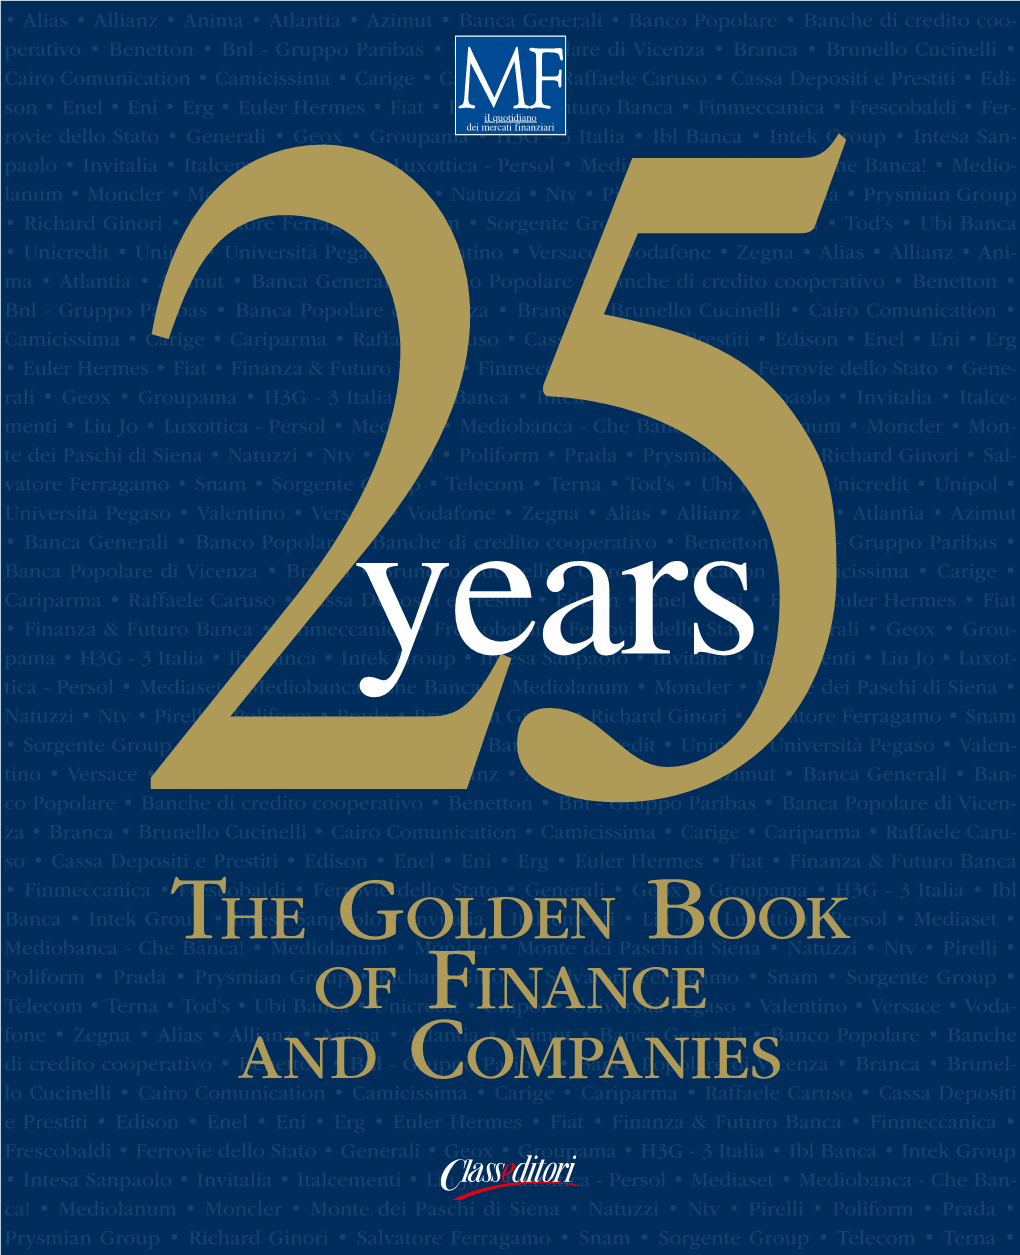 The Golden Book of Finance and Companies